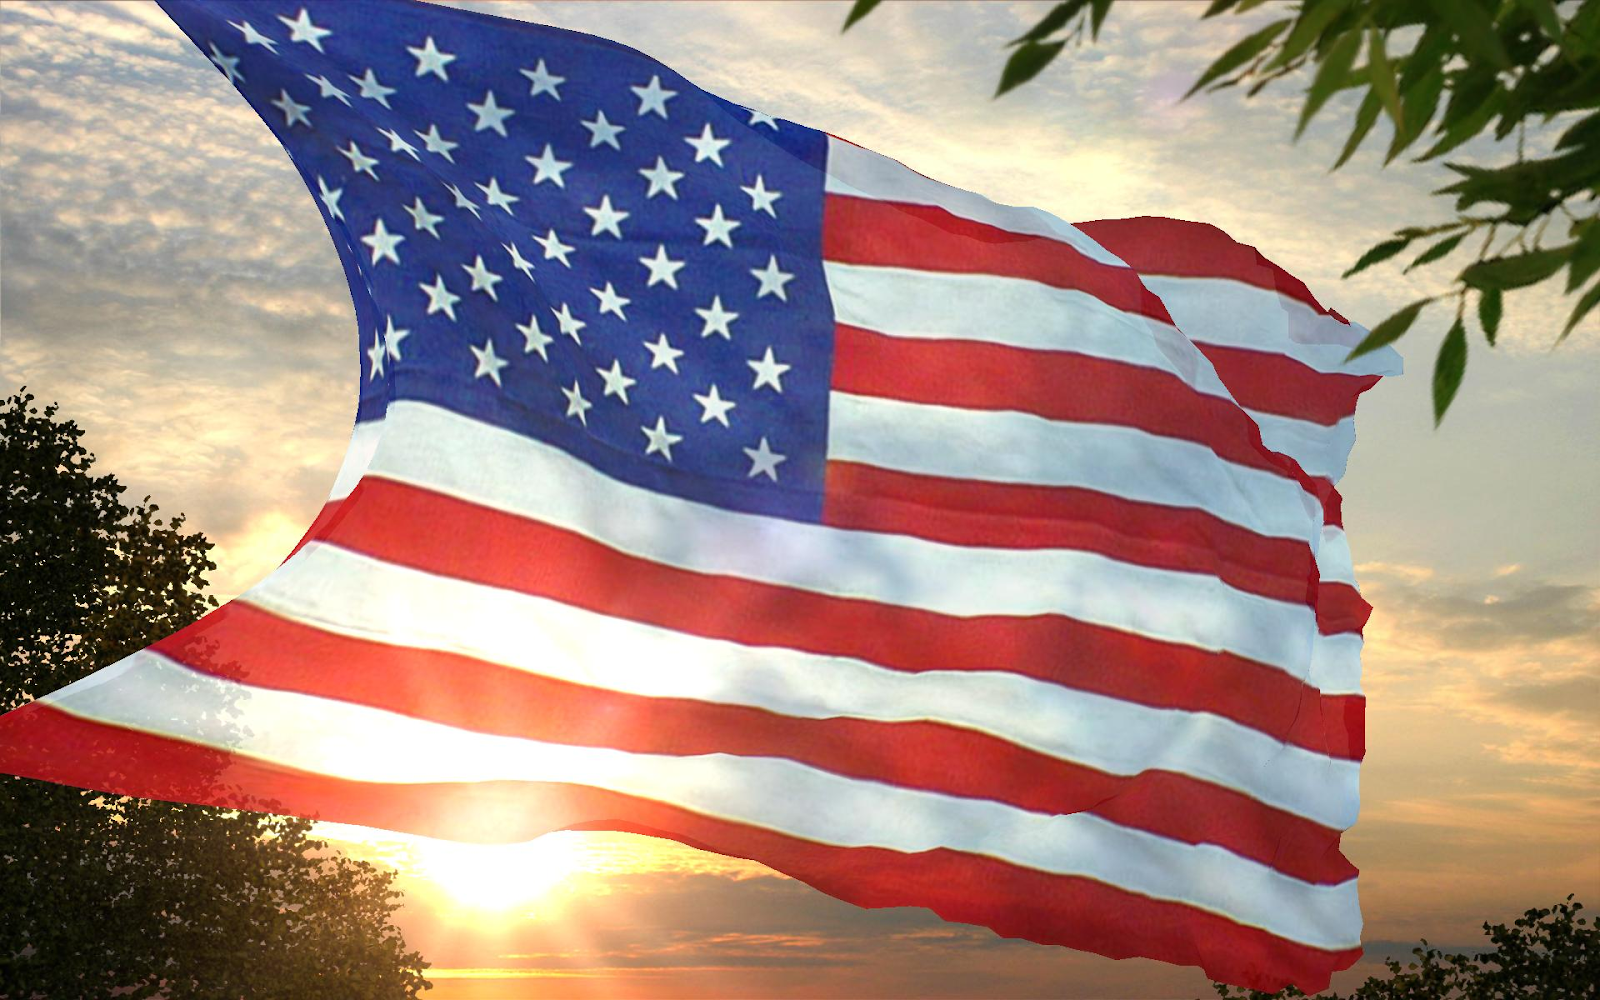 Honoring Our Stars and Stripes: A Guide to Respecting the American Flag